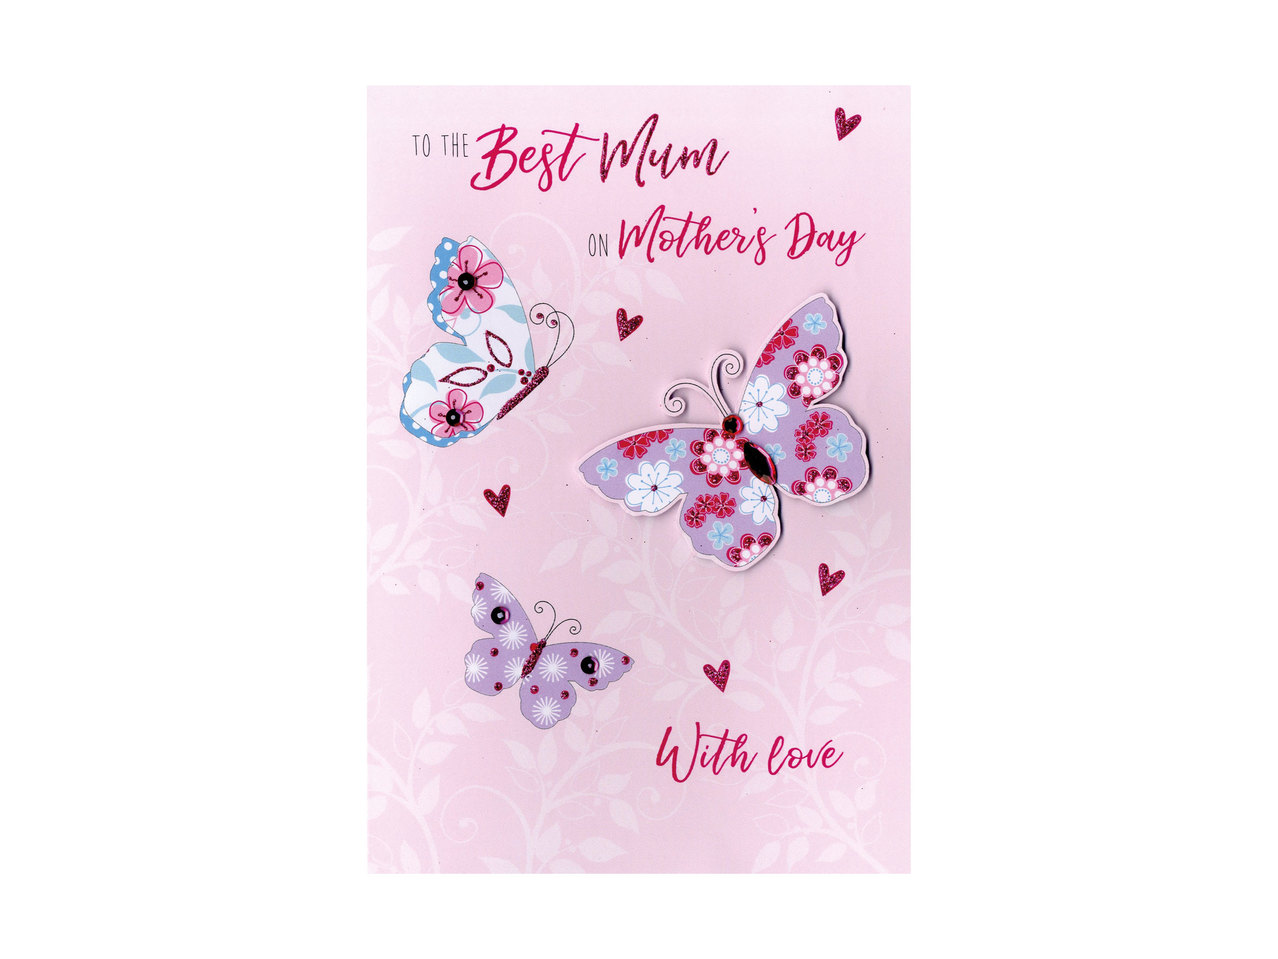 Luxury Handmade Mother's Day Cards1